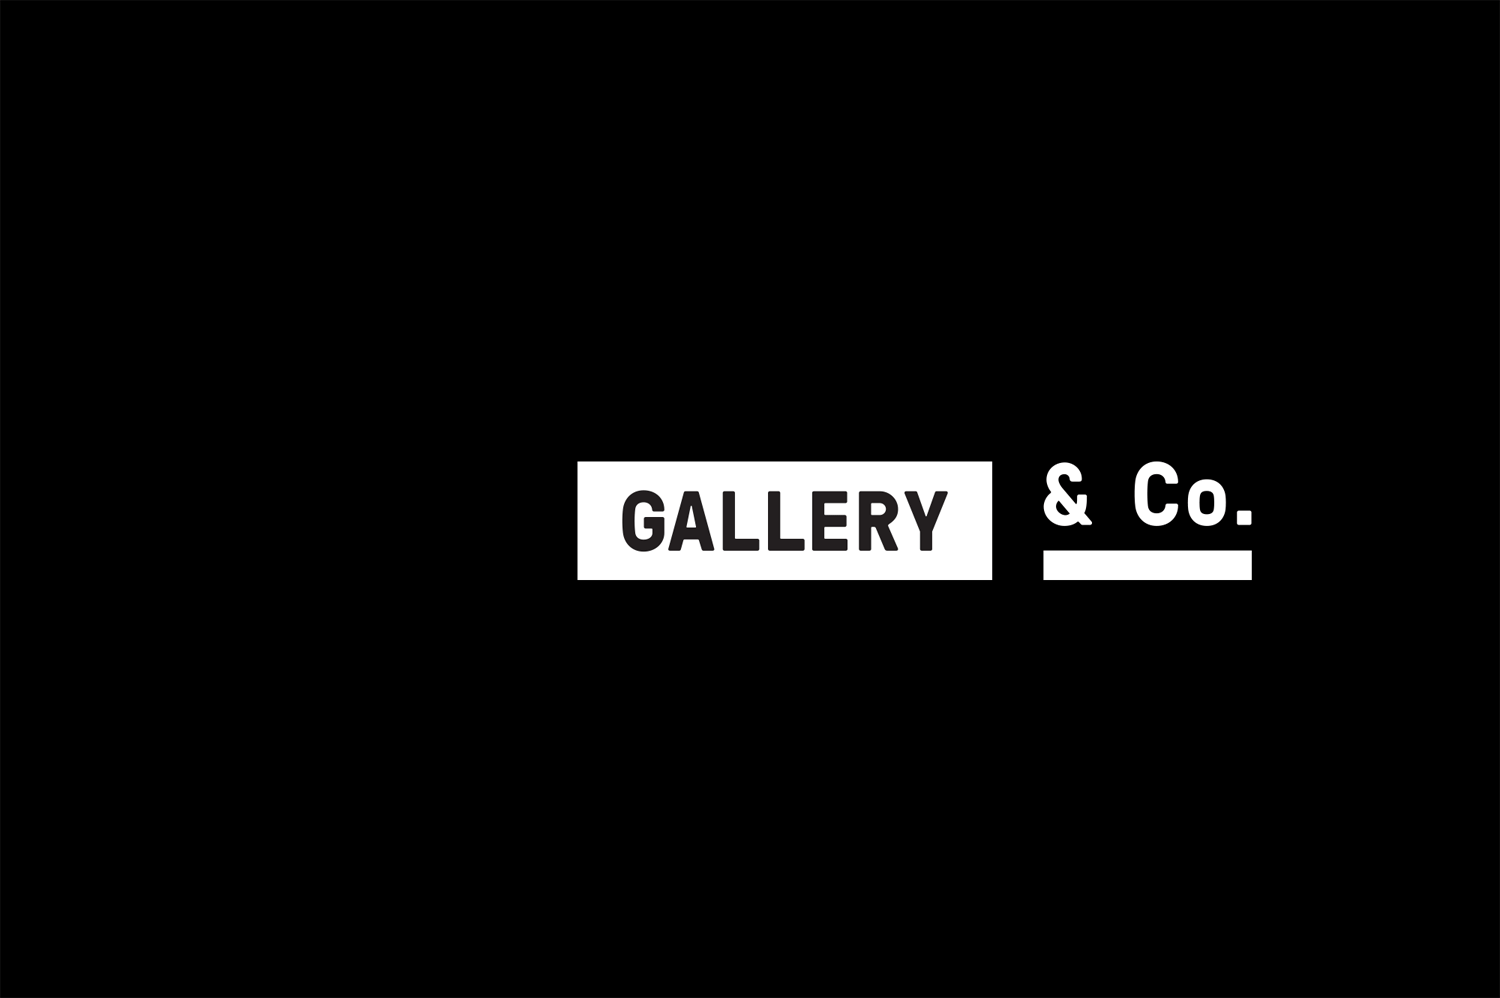 Gallery & Co. 2